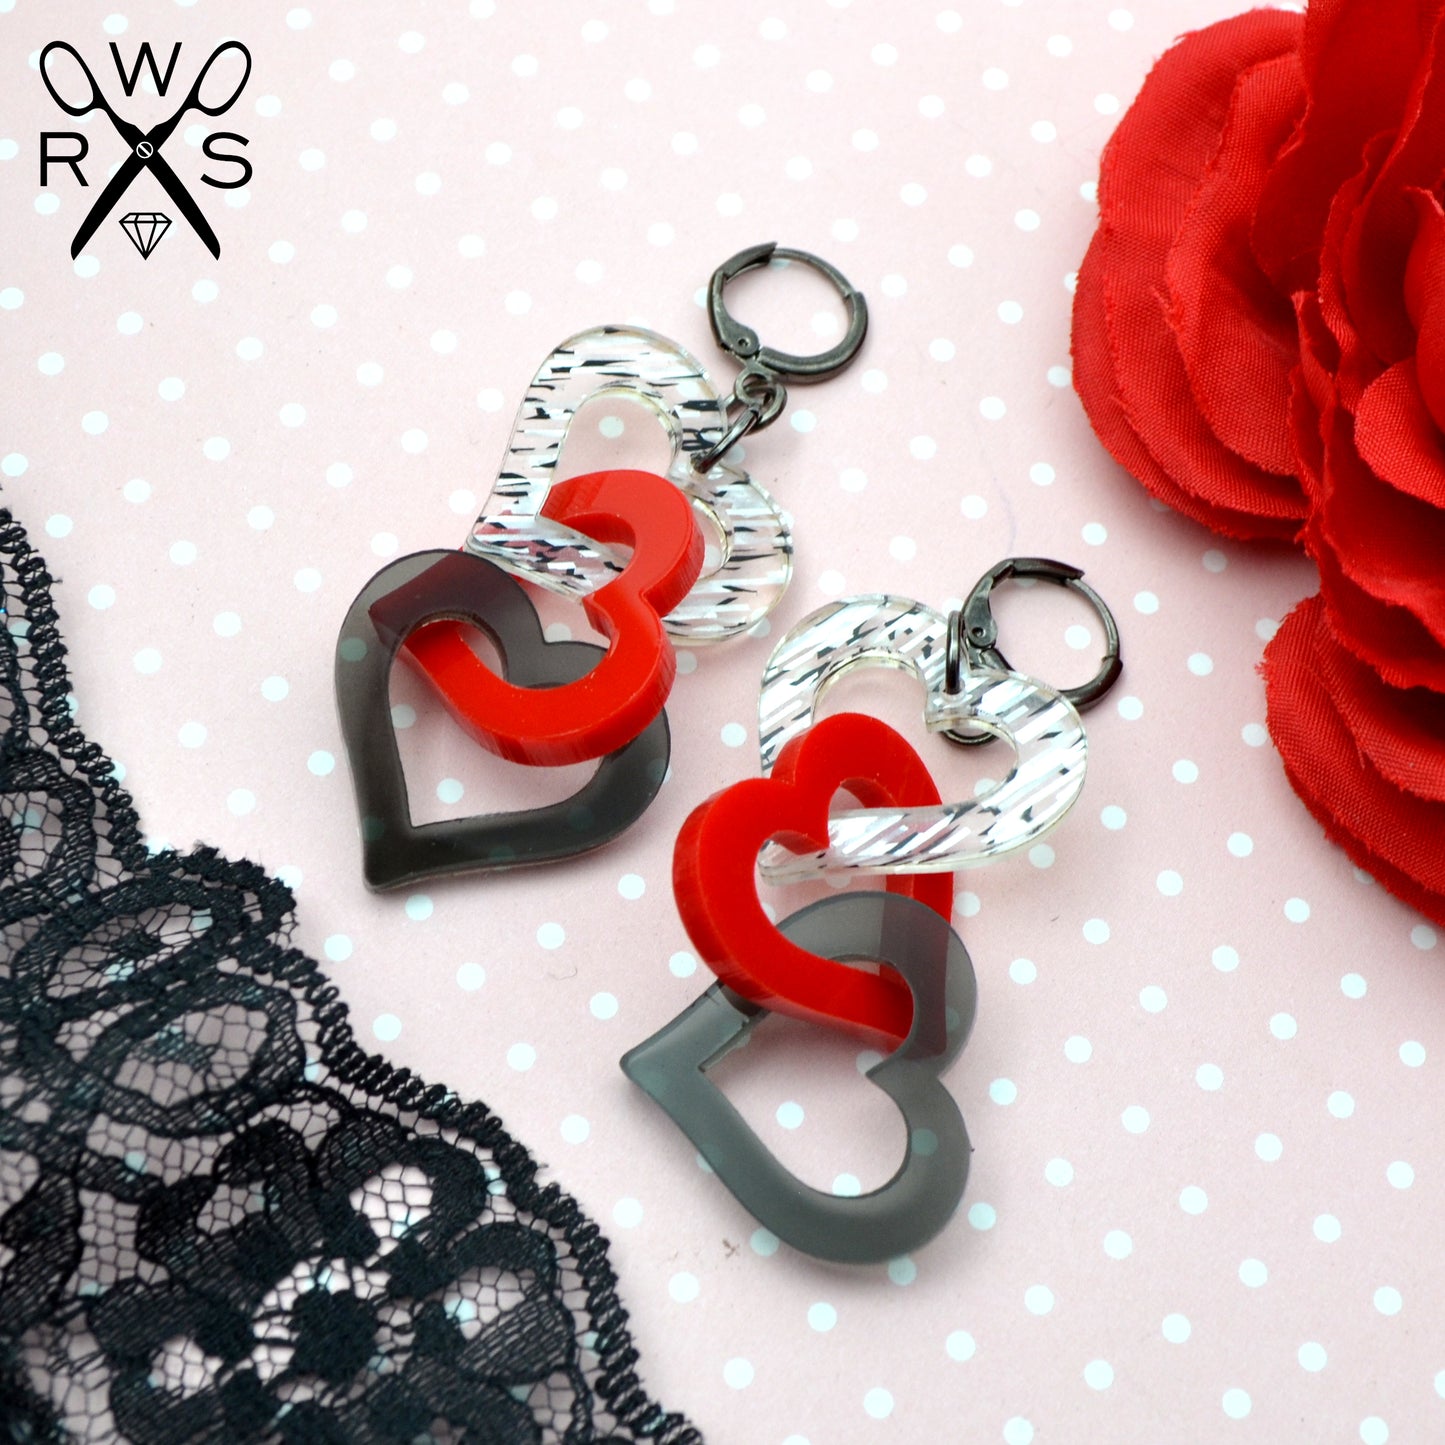 SALE LOVE TRIANGLE DANGLES - in Bright Red, Smoke, and Tinsel Laser Cut Acrylic